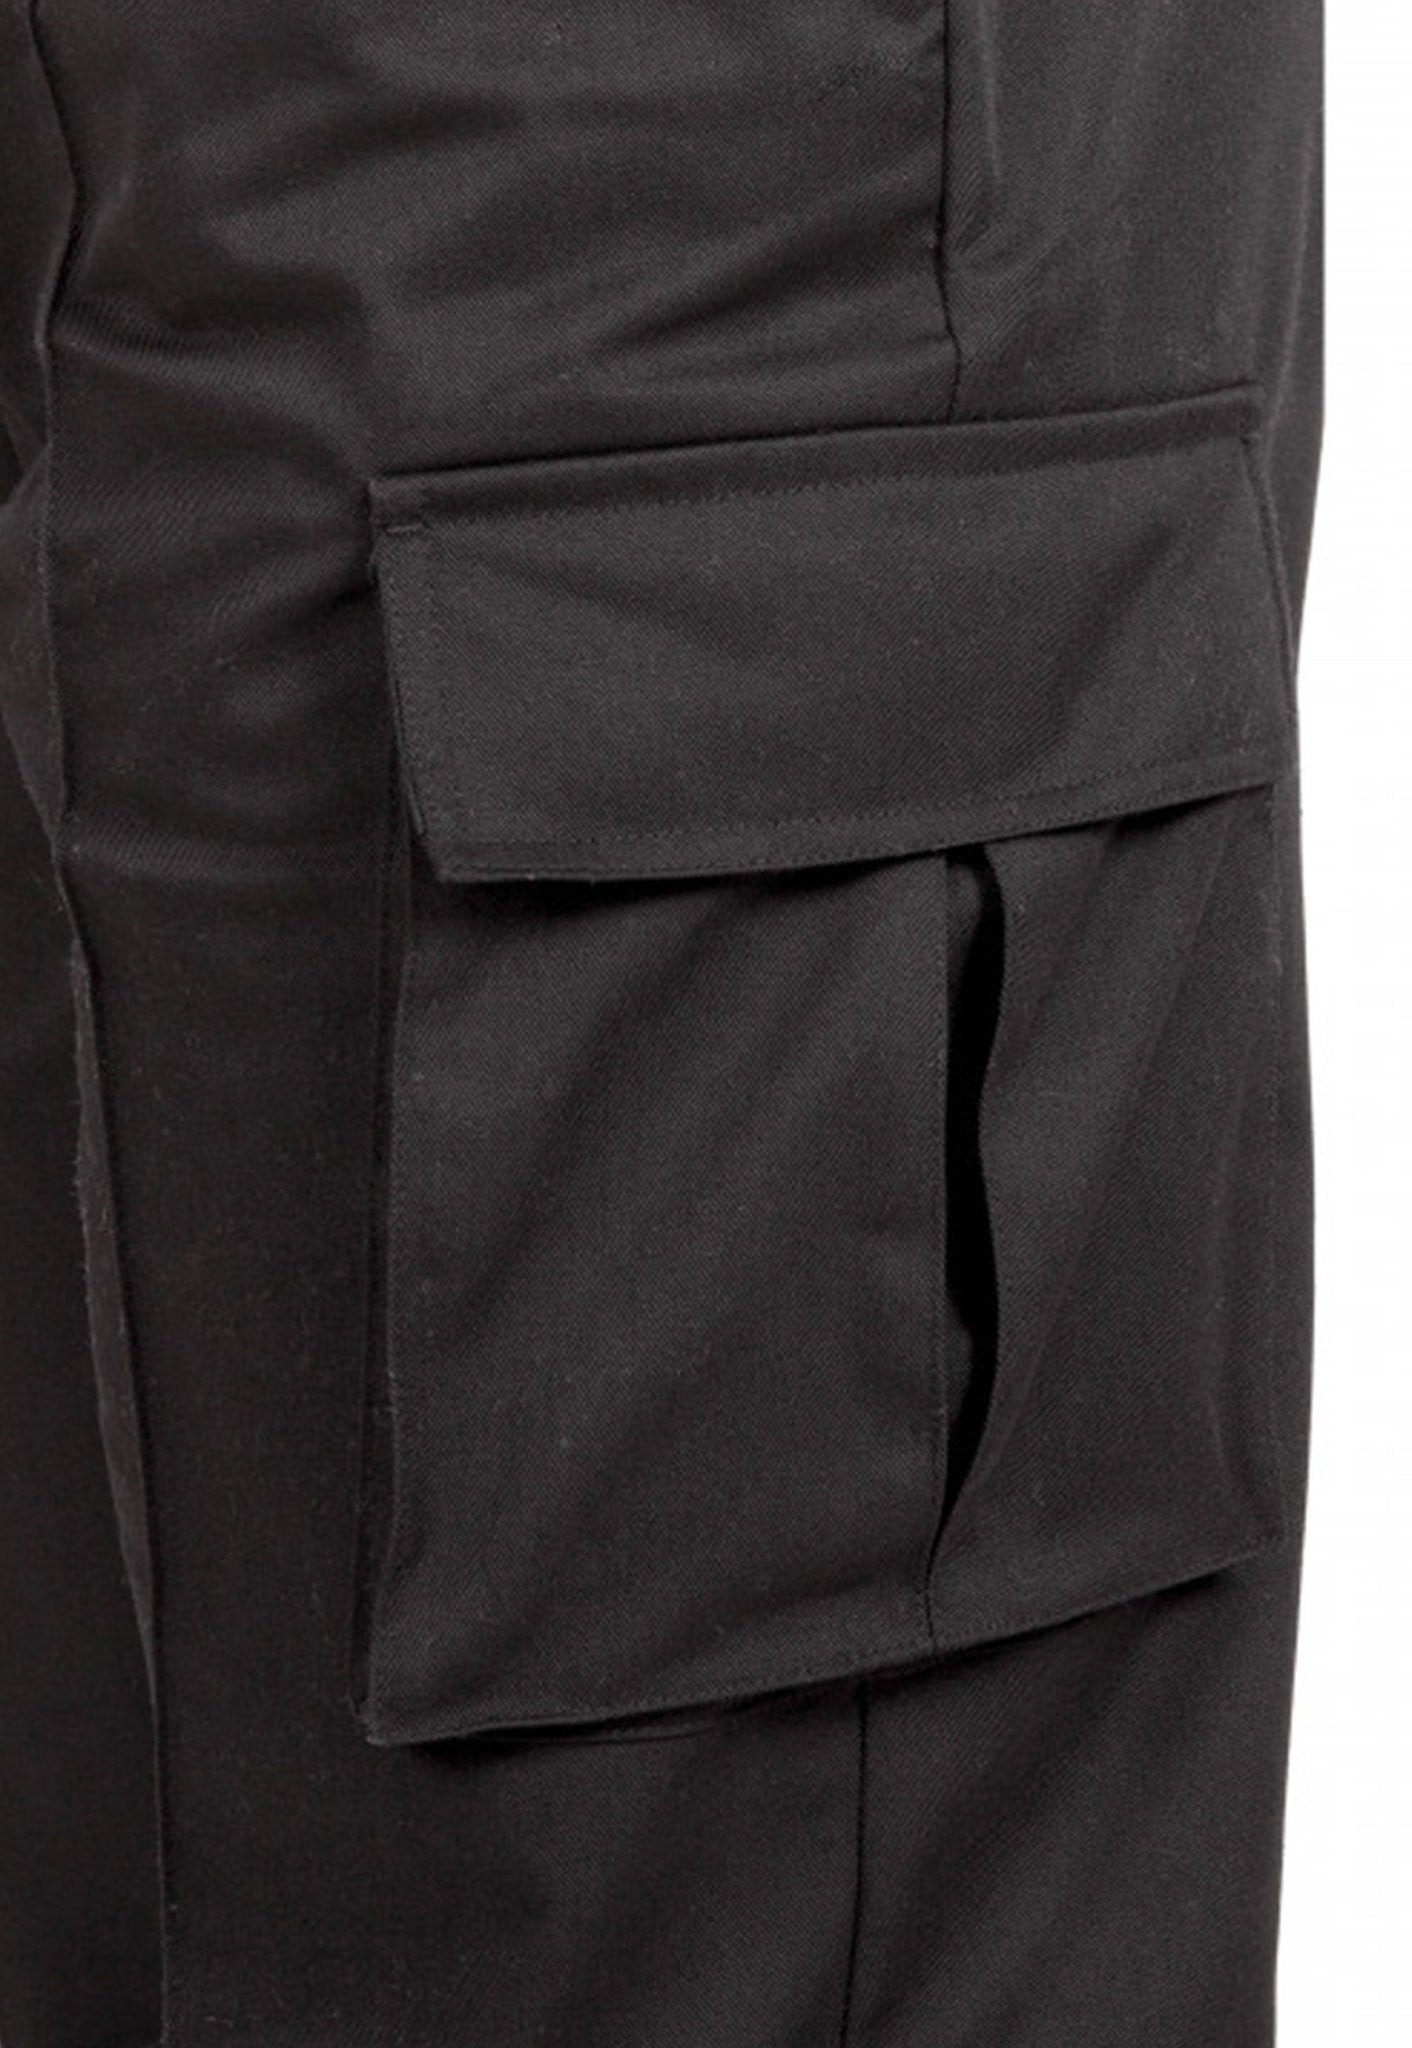 Security Cargo Trousers  Cargo Pants  The Work Uniform Company